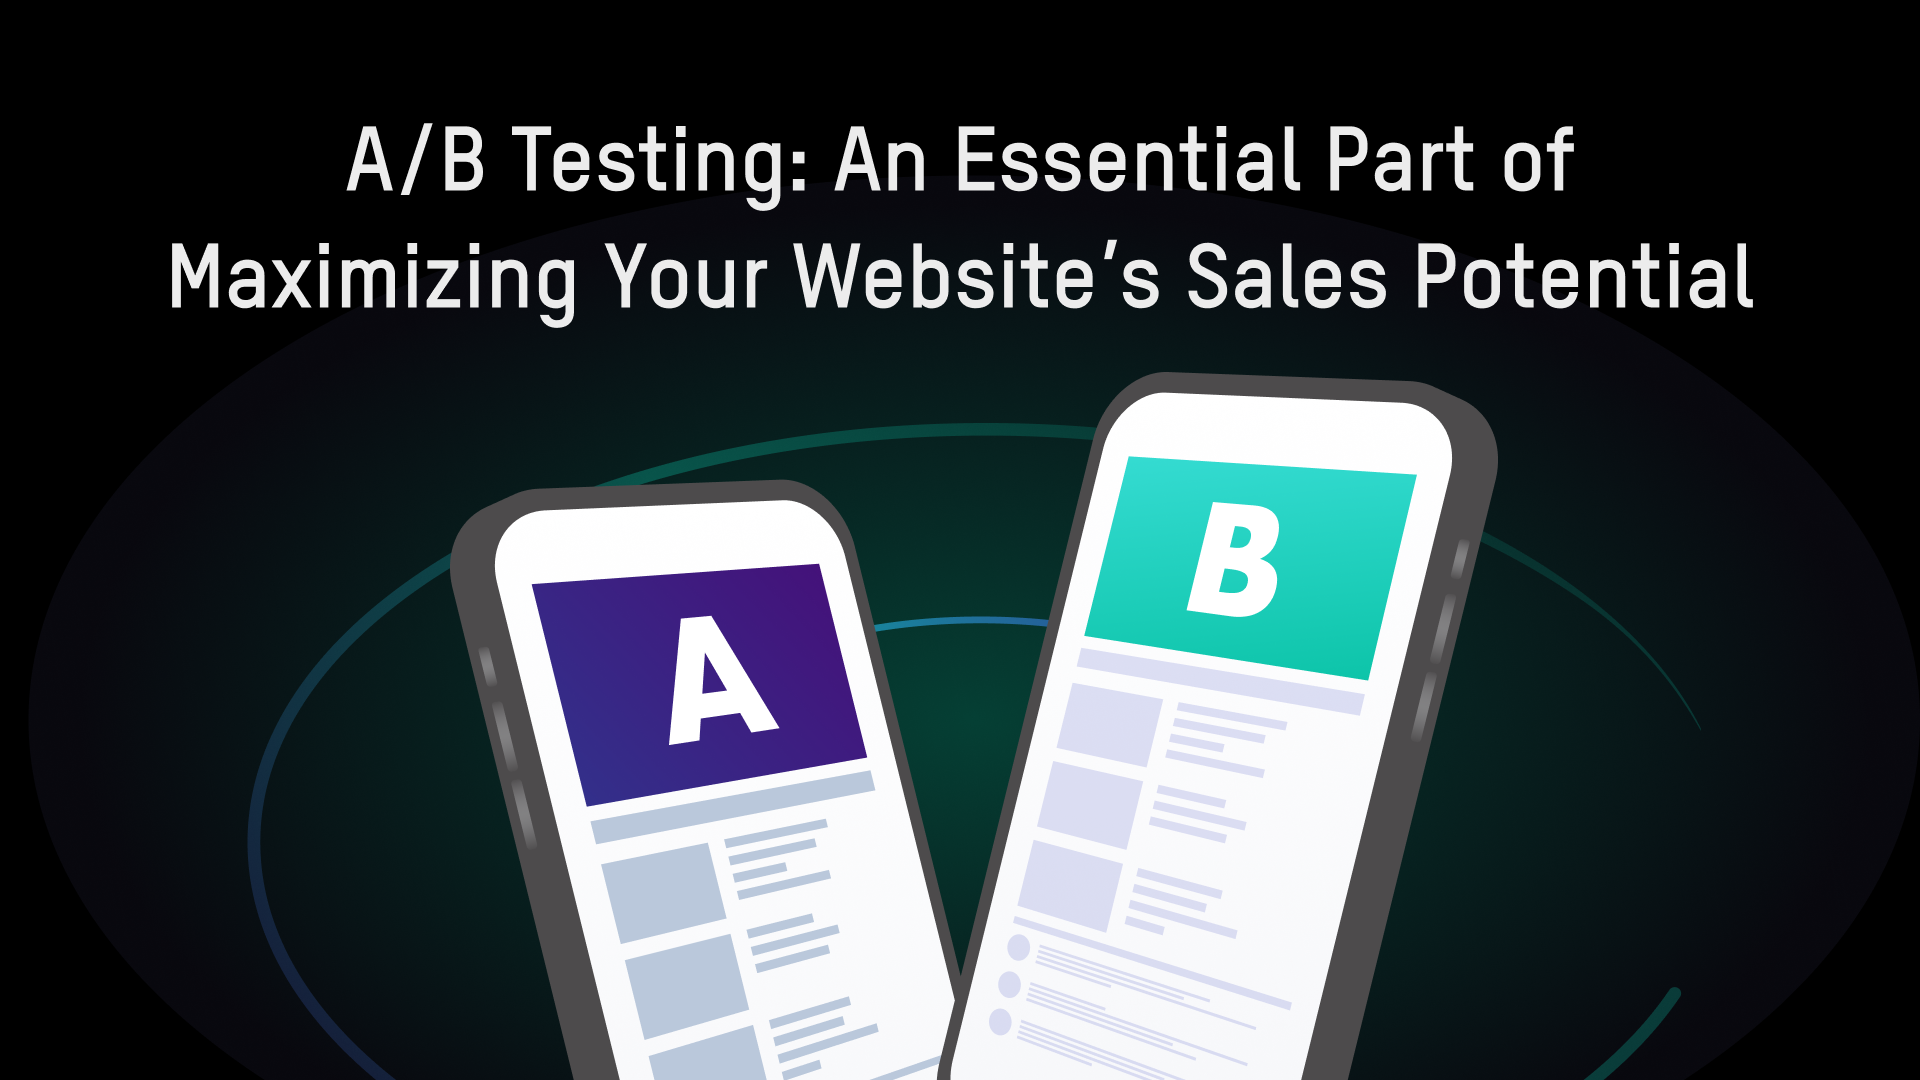 A/B Testing: An Essential Part of Maximizing Your Website’s Sales Potential